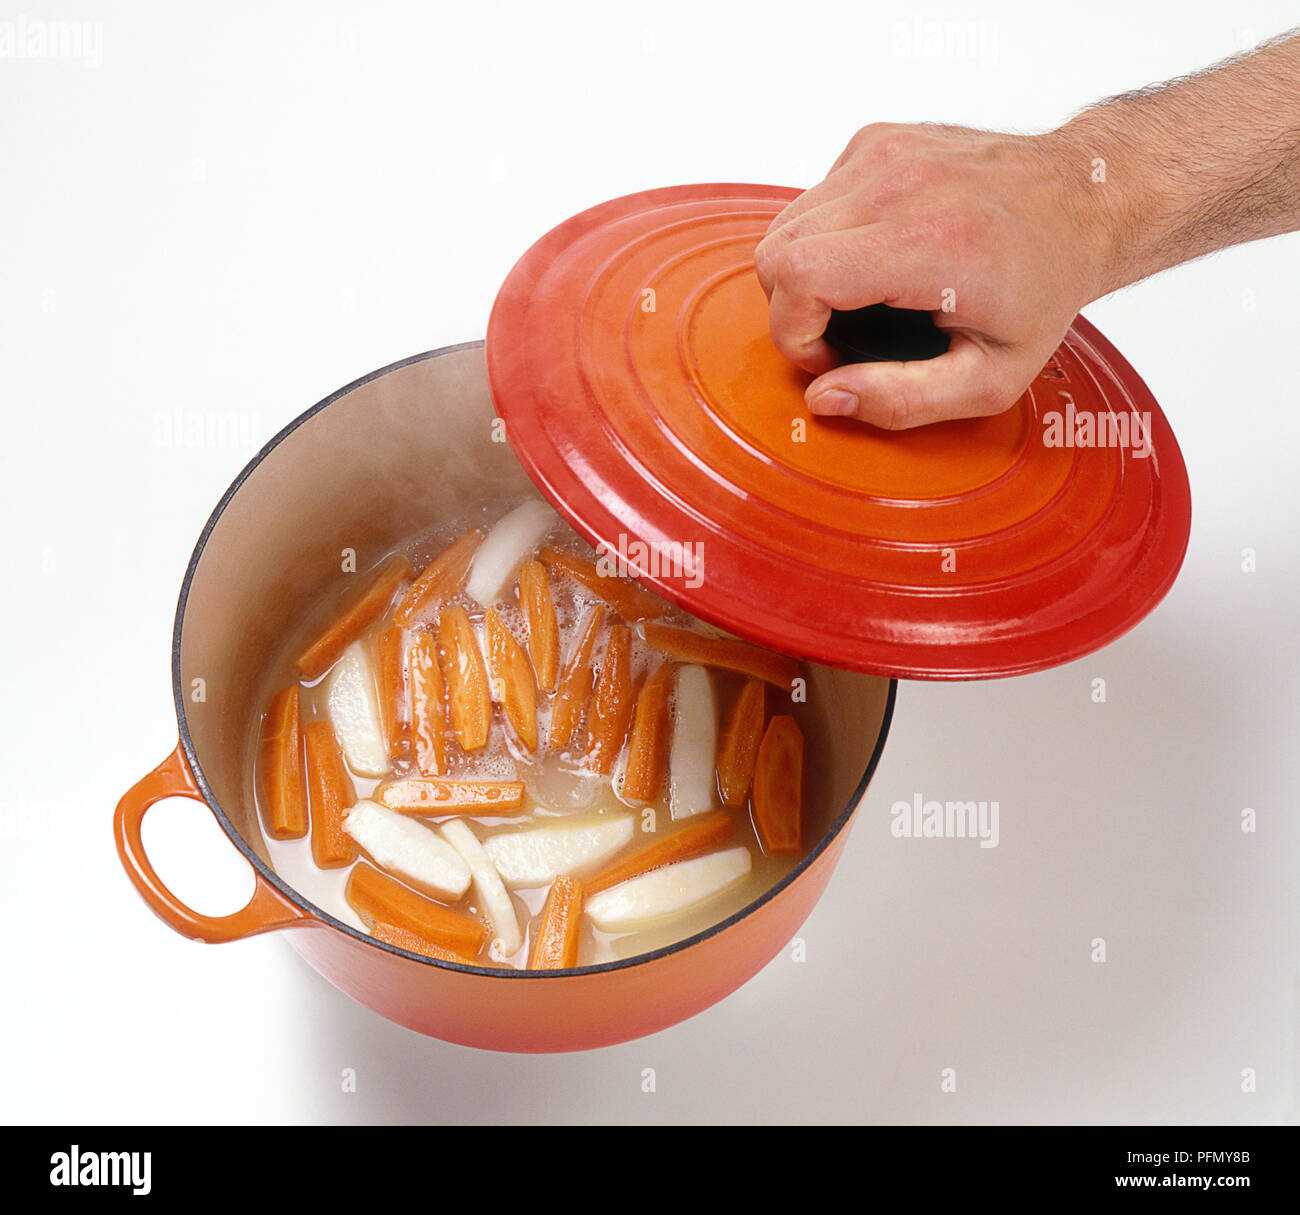 Hand lifting lid from pan of braised carrots and celeriac, close-up Stock Photo